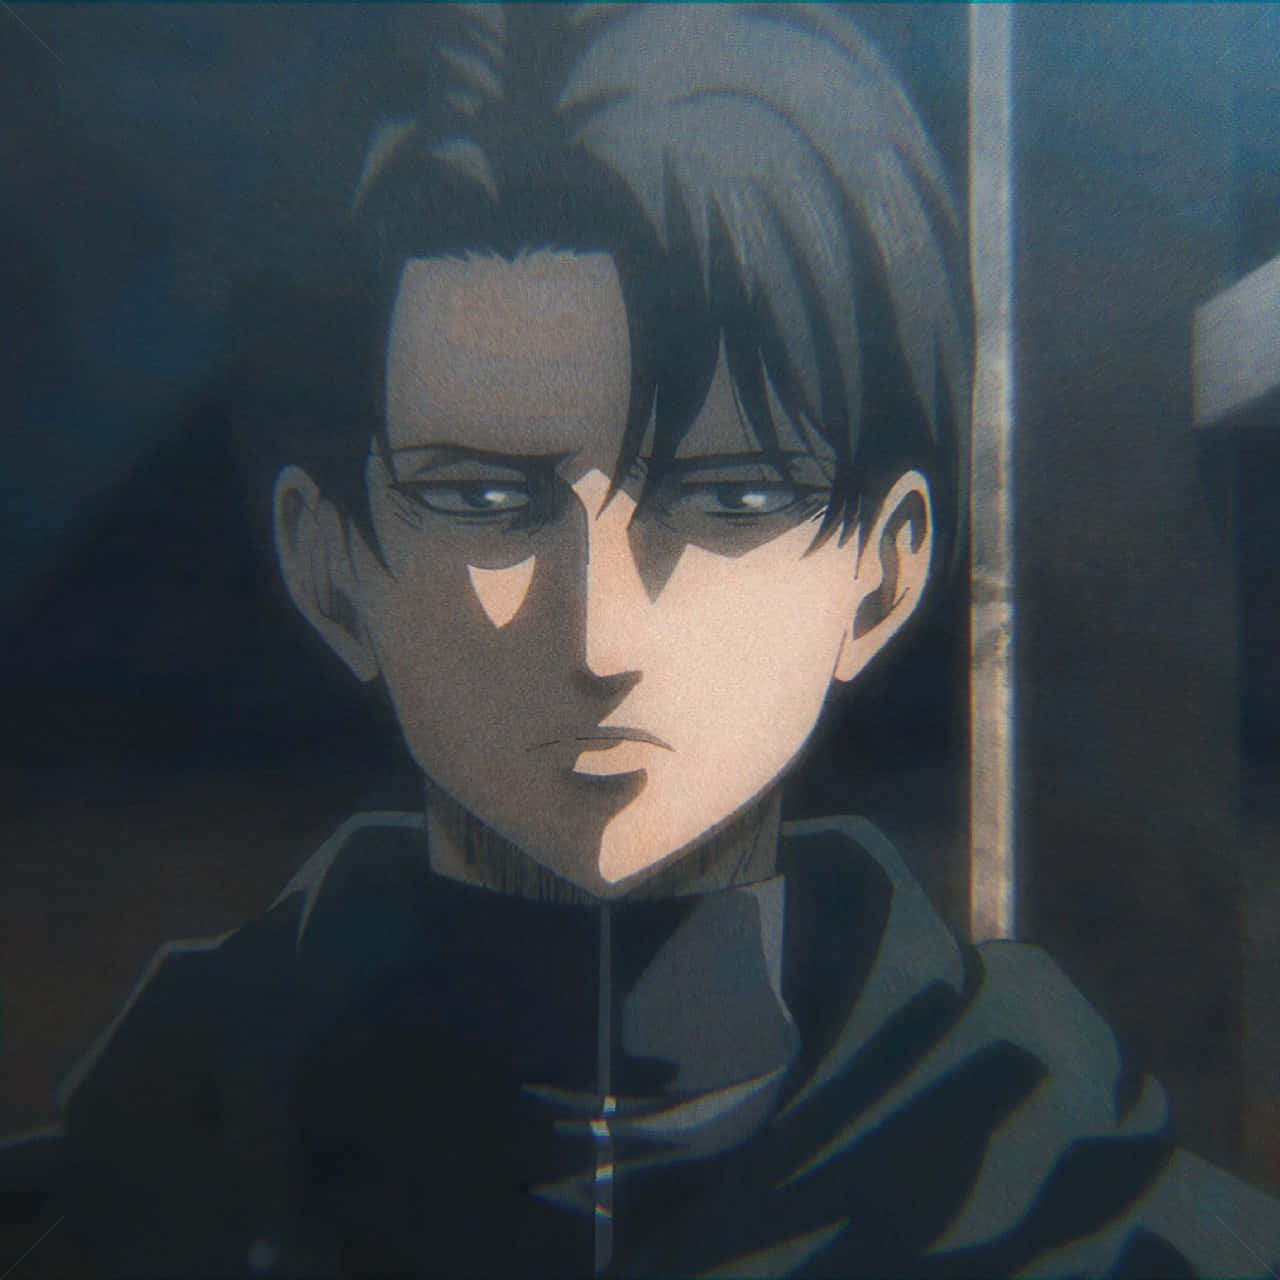 Solemnlevi Pfp (profile Picture) Would Be Translated As 